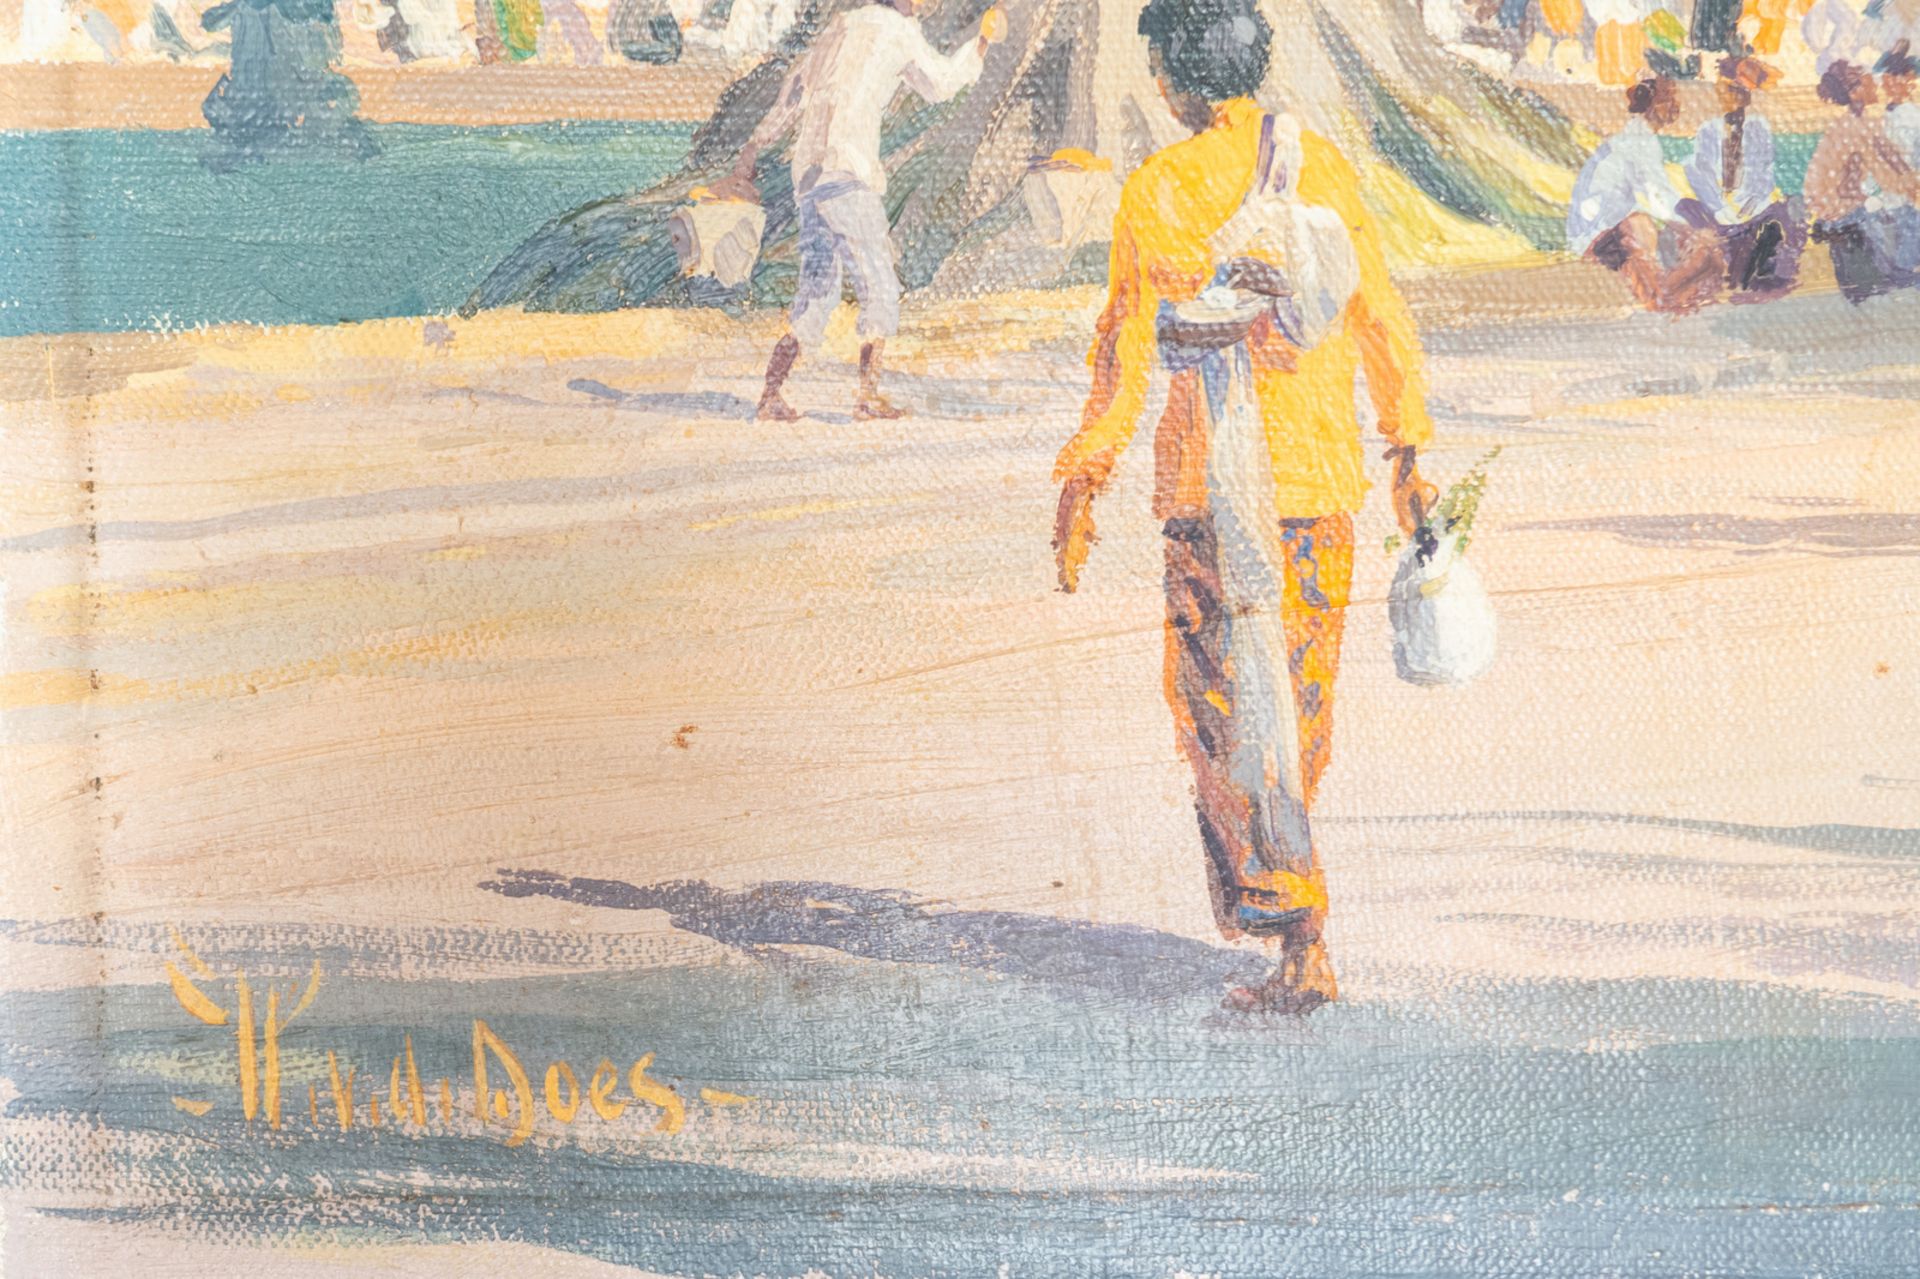 Willem Jan Pieter van der Does (1889-1966), oil on canvas: 'A streetview in Bali' - Image 7 of 7